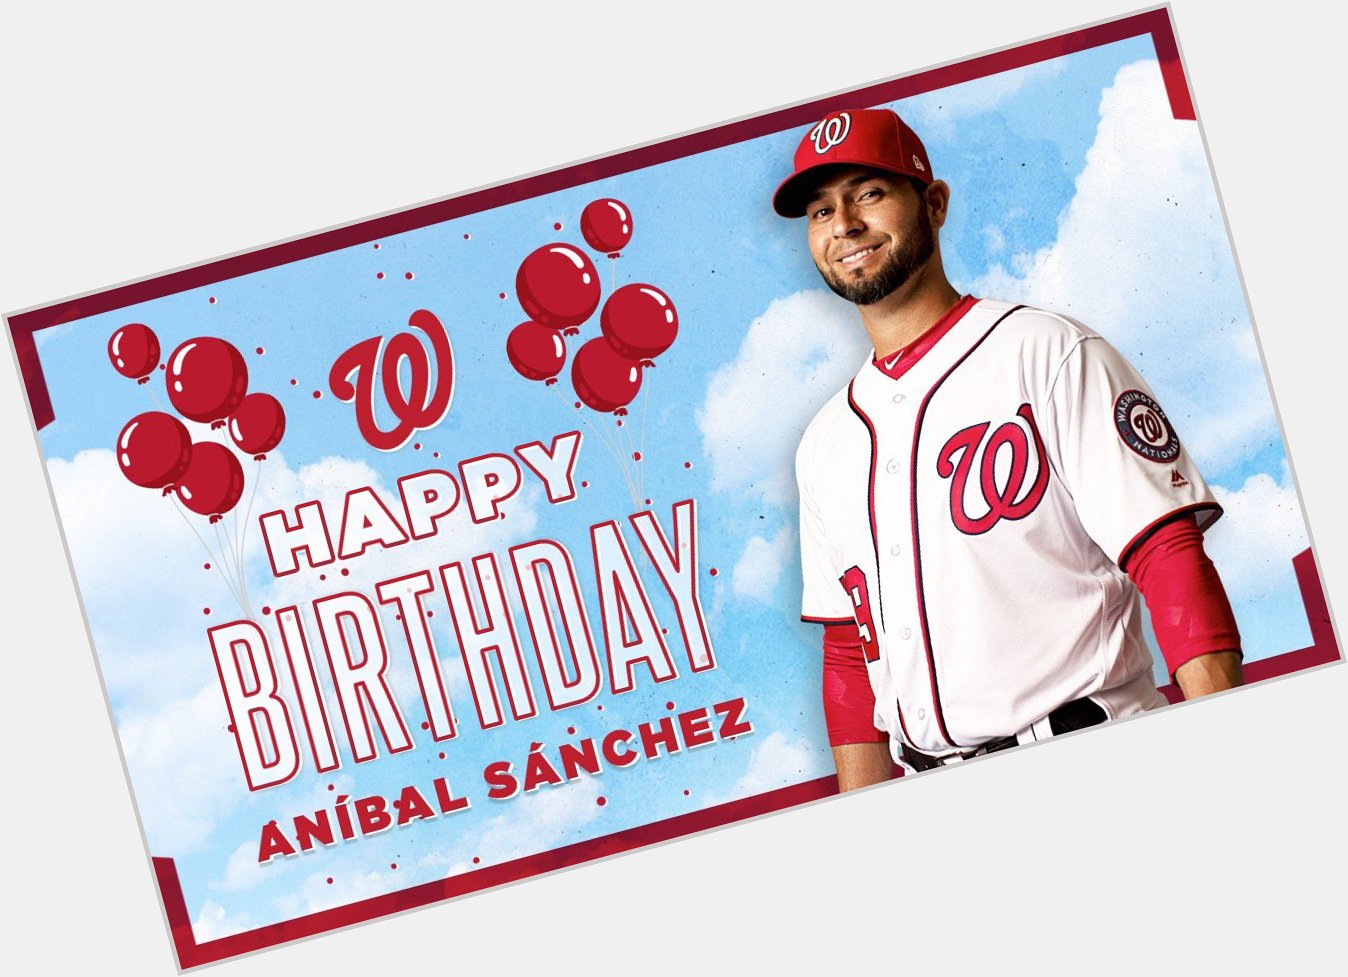 To the man with 1,000 pitches in his arsenal...

Help us wish Aníbal Sánchez a happy birthday!  